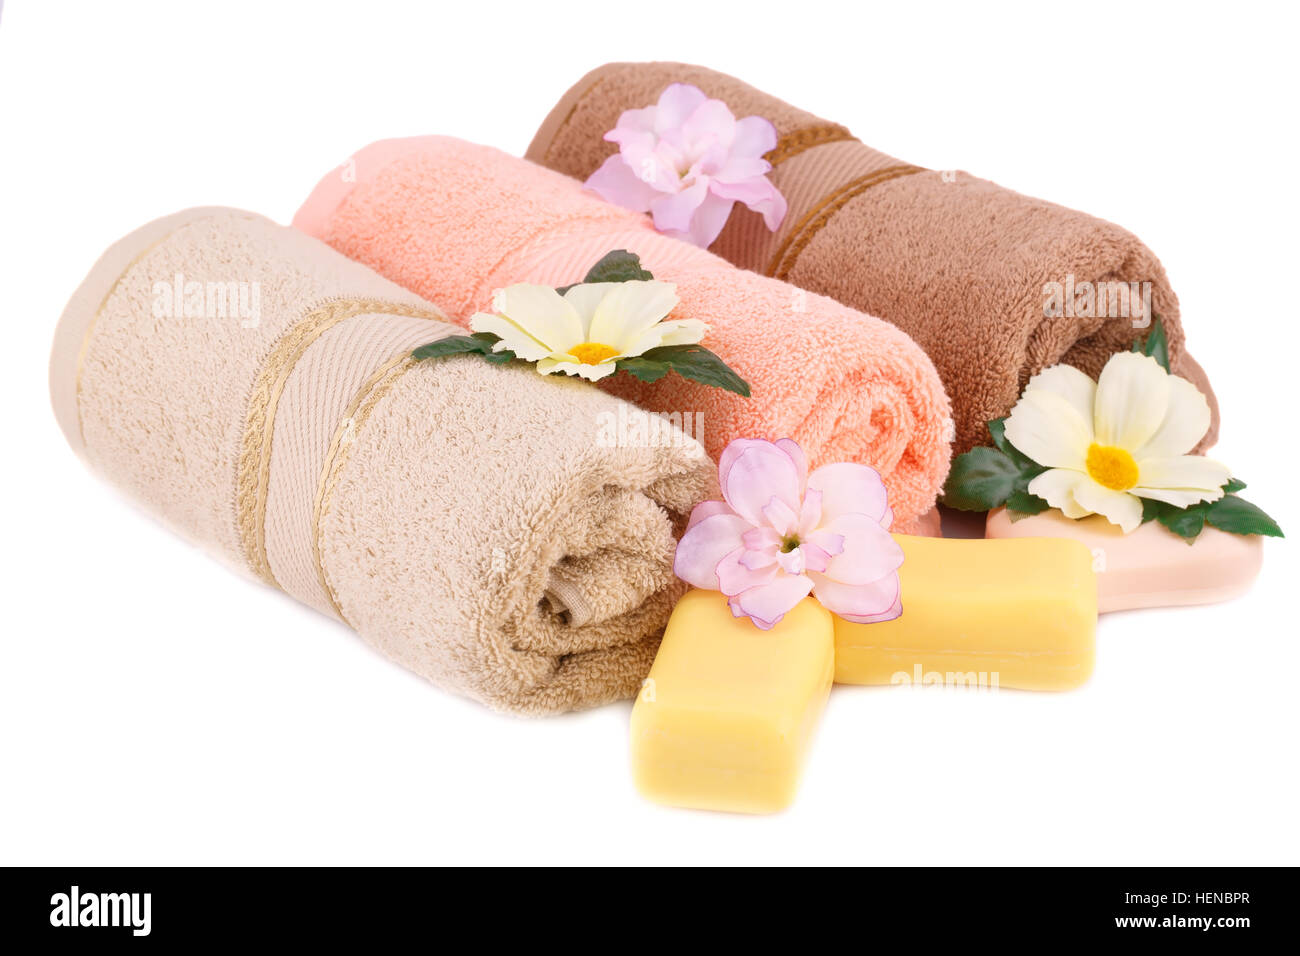 Rolled towels, soaps and flowers isolated on white background. Stock Photo